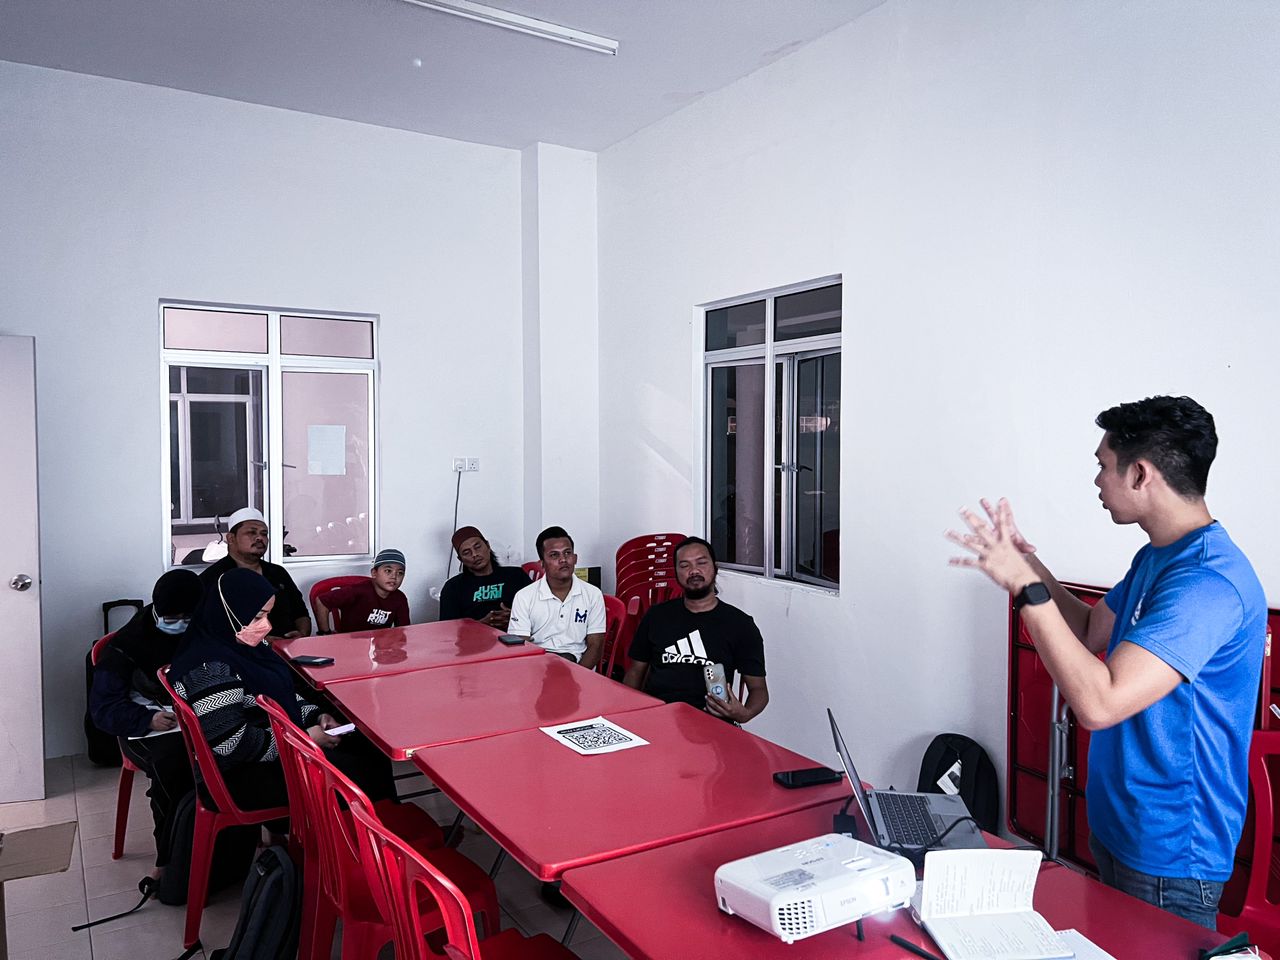 Cover image of Community Past Program: Community Apps – Presentation of Community Apps was conducted at Residensi Tapah, Perak.